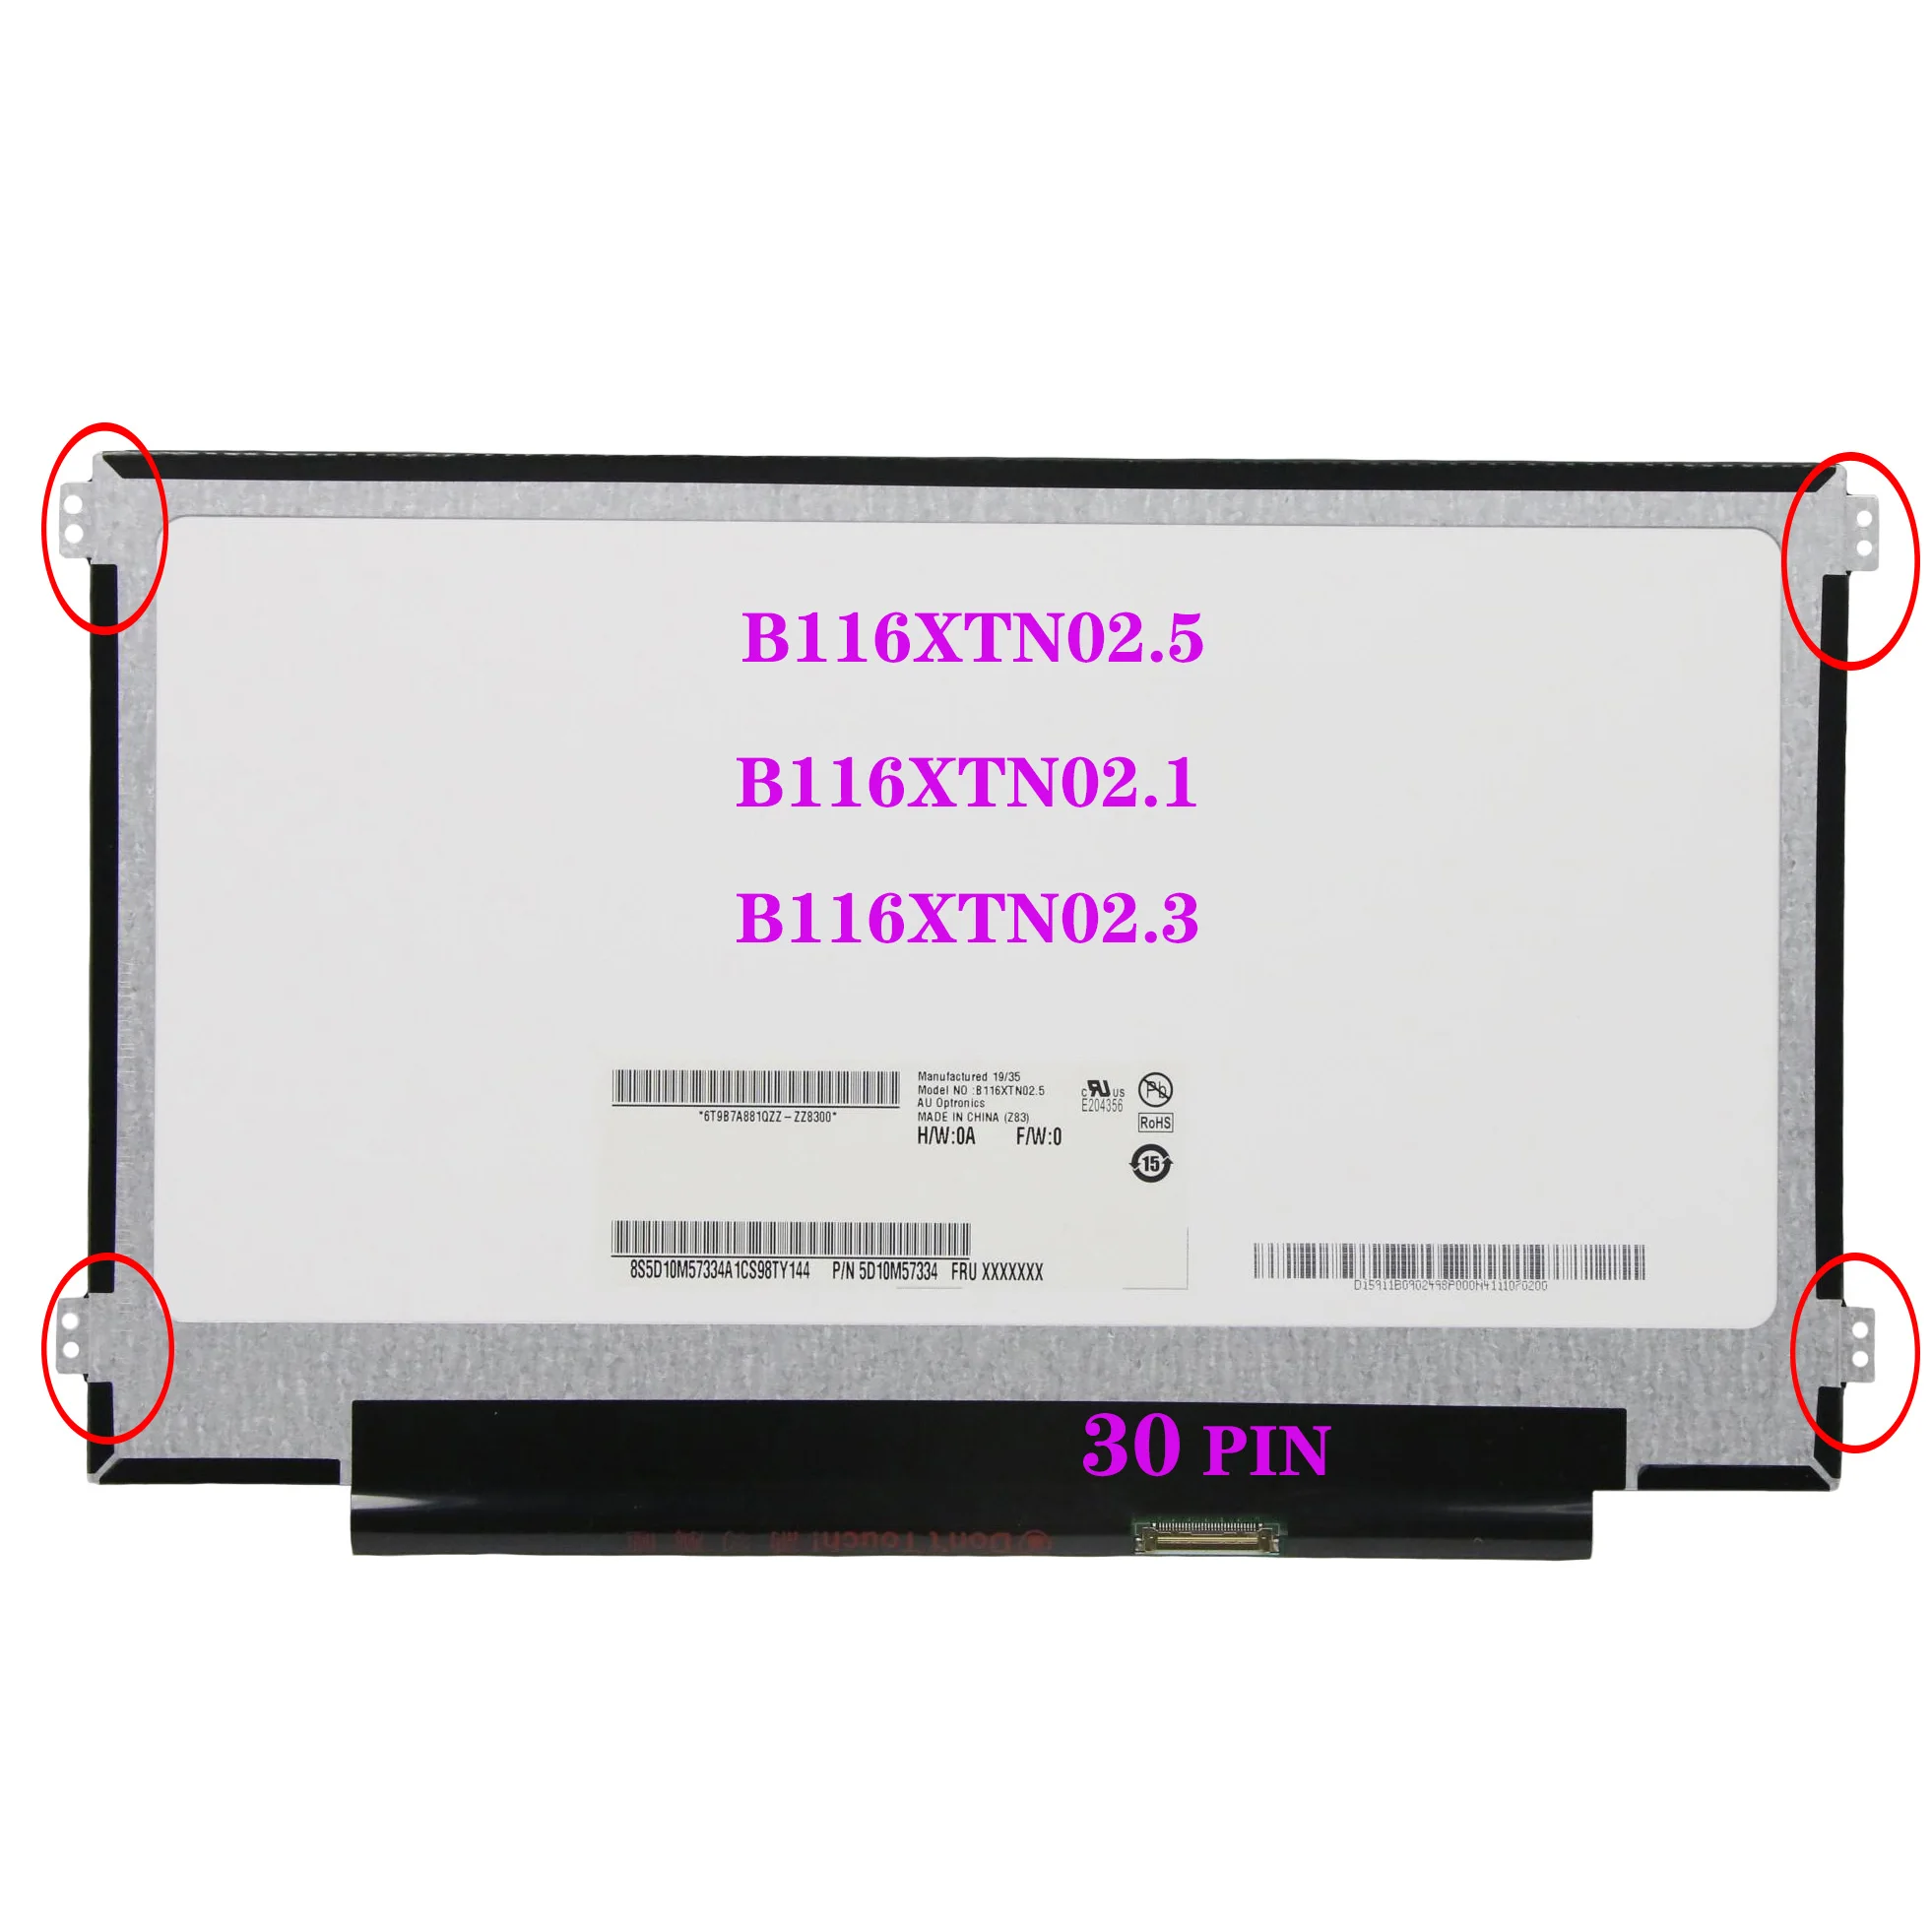 

11.6&qB116XTN02.5 B116XTN02.1 B116XTN02.3 HW4A HW2D HW2G For Lenovo Ideapad S21E-20 Notebook Panel 30 Pin LCD Screen Replacement